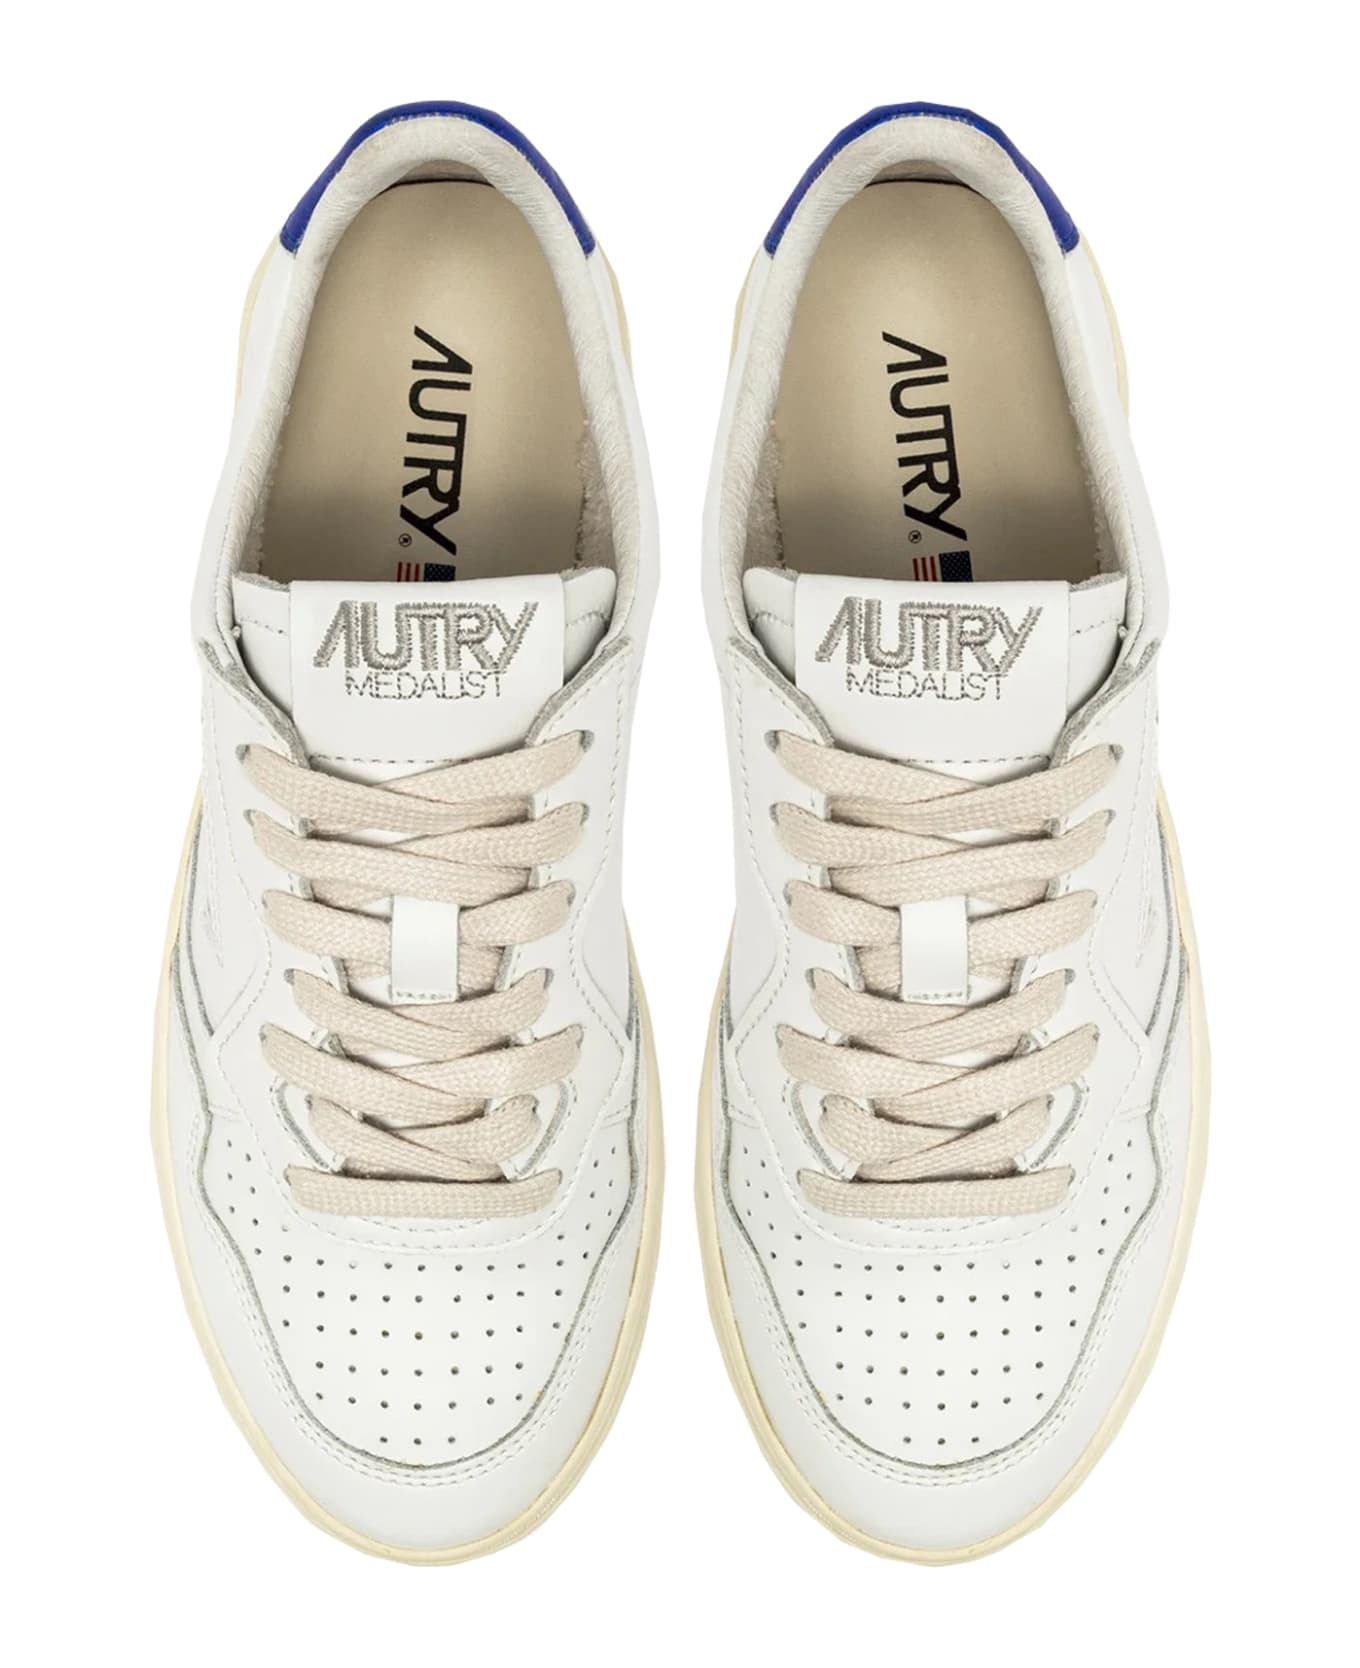 Autry Medalist Low Sneakers - Blue